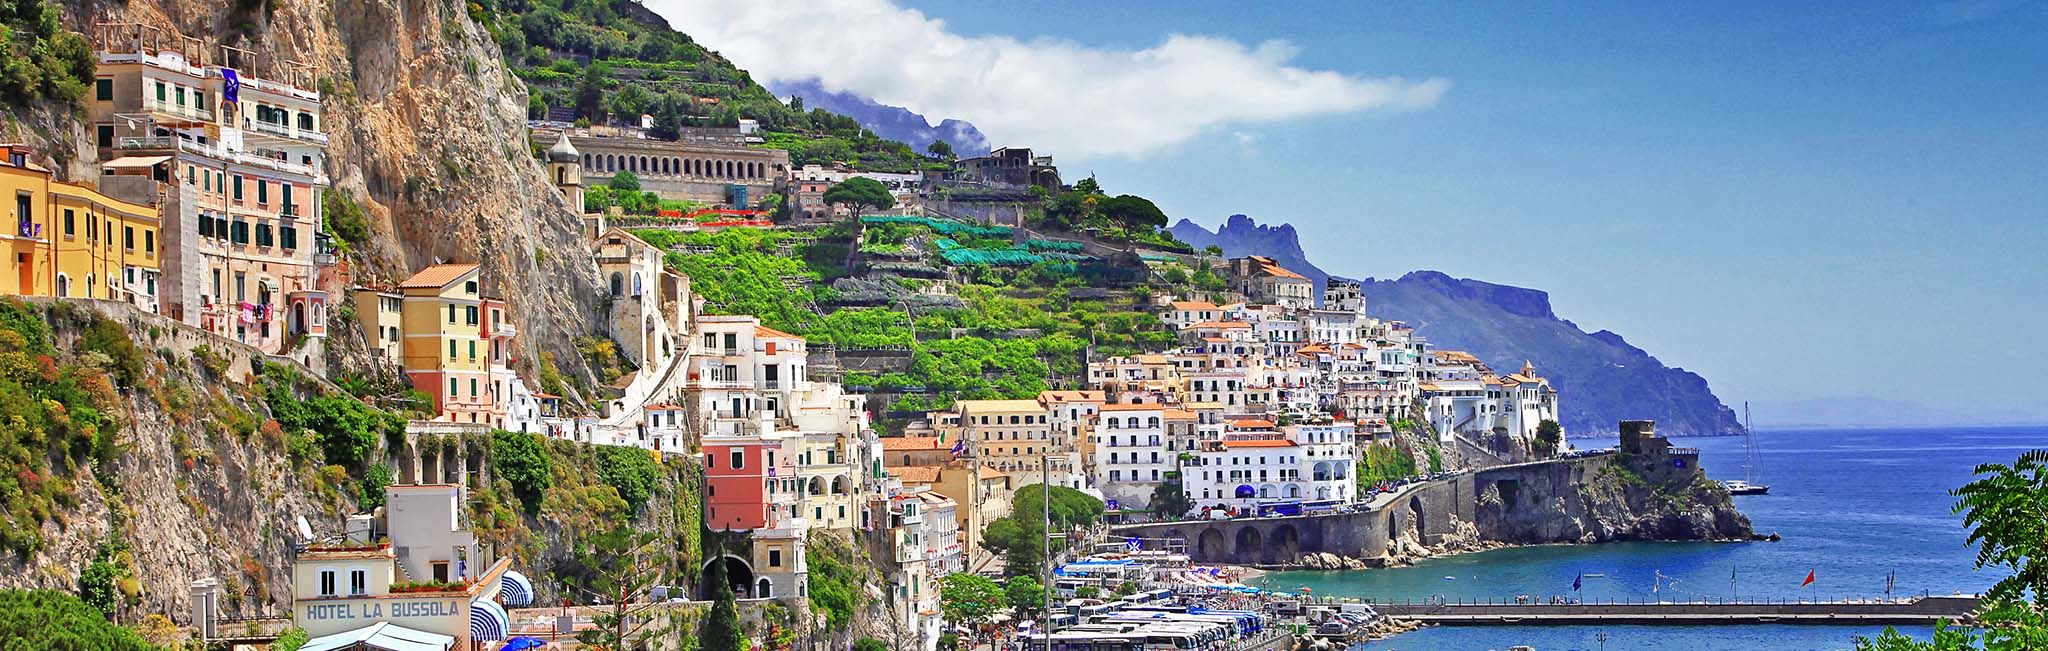 southern italy and greece tours